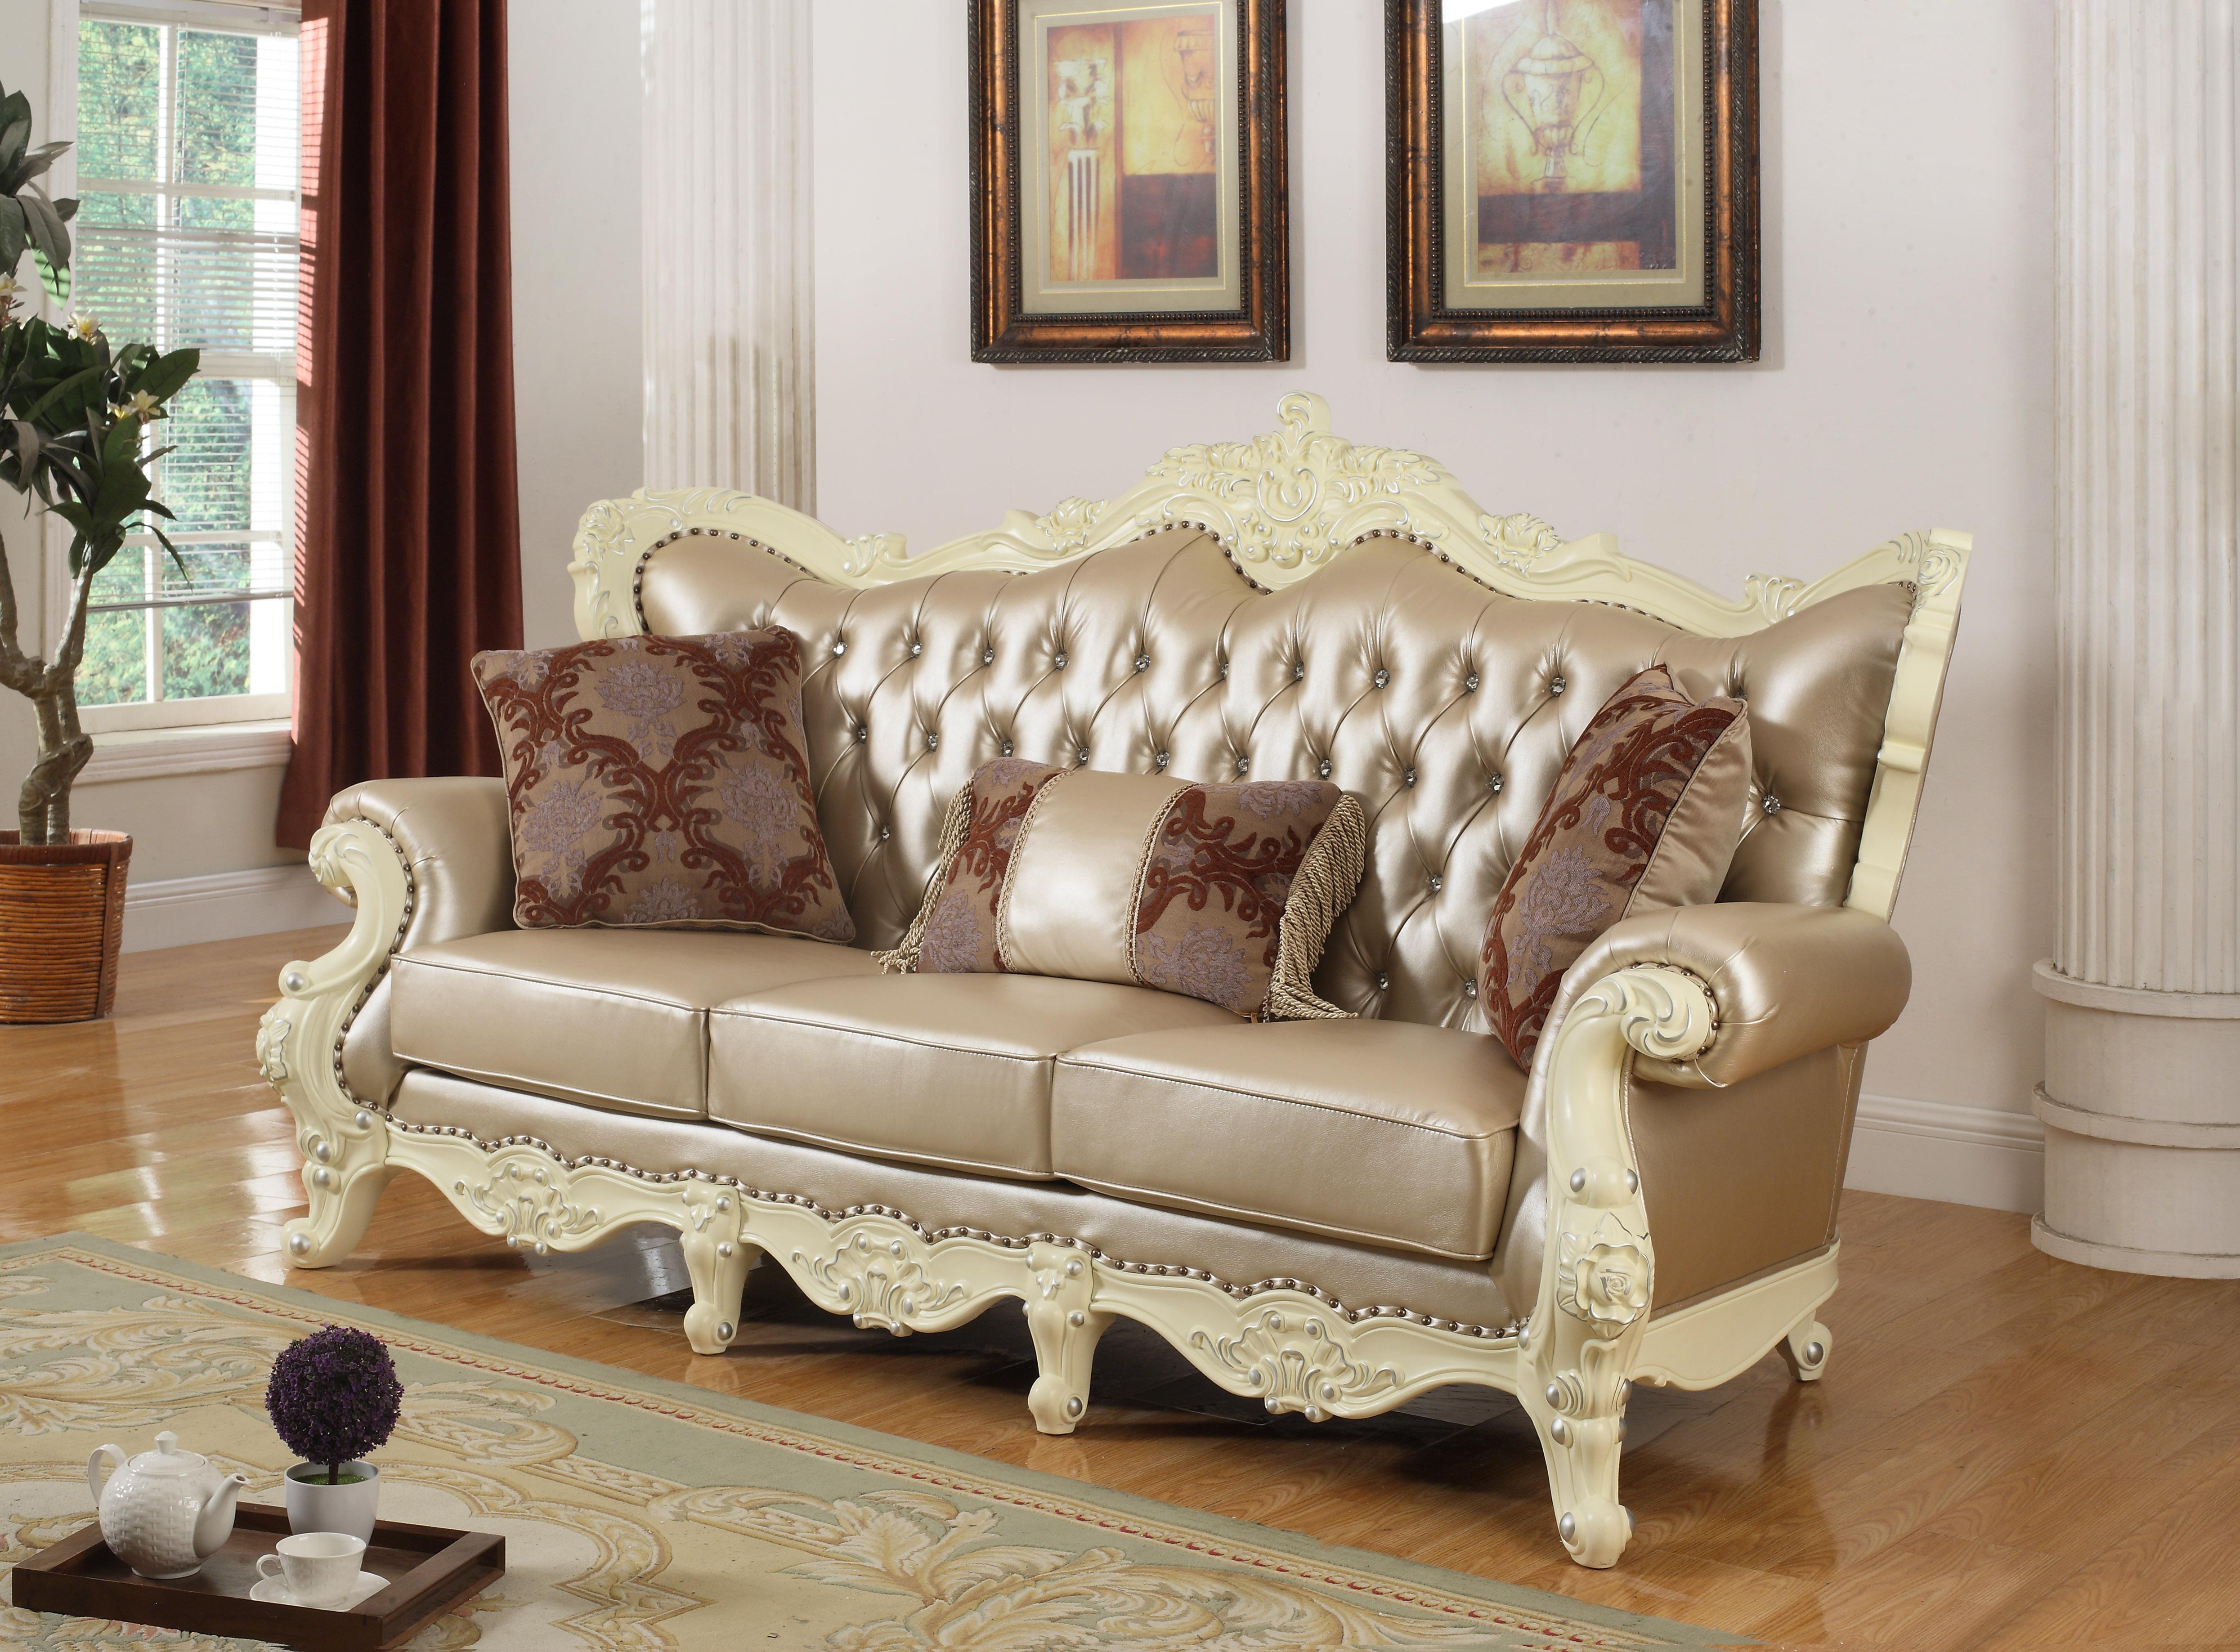 

    
Meridian 674 Madrid Living Room Set 3pcs in Pearl White Hand Carved Traditional
